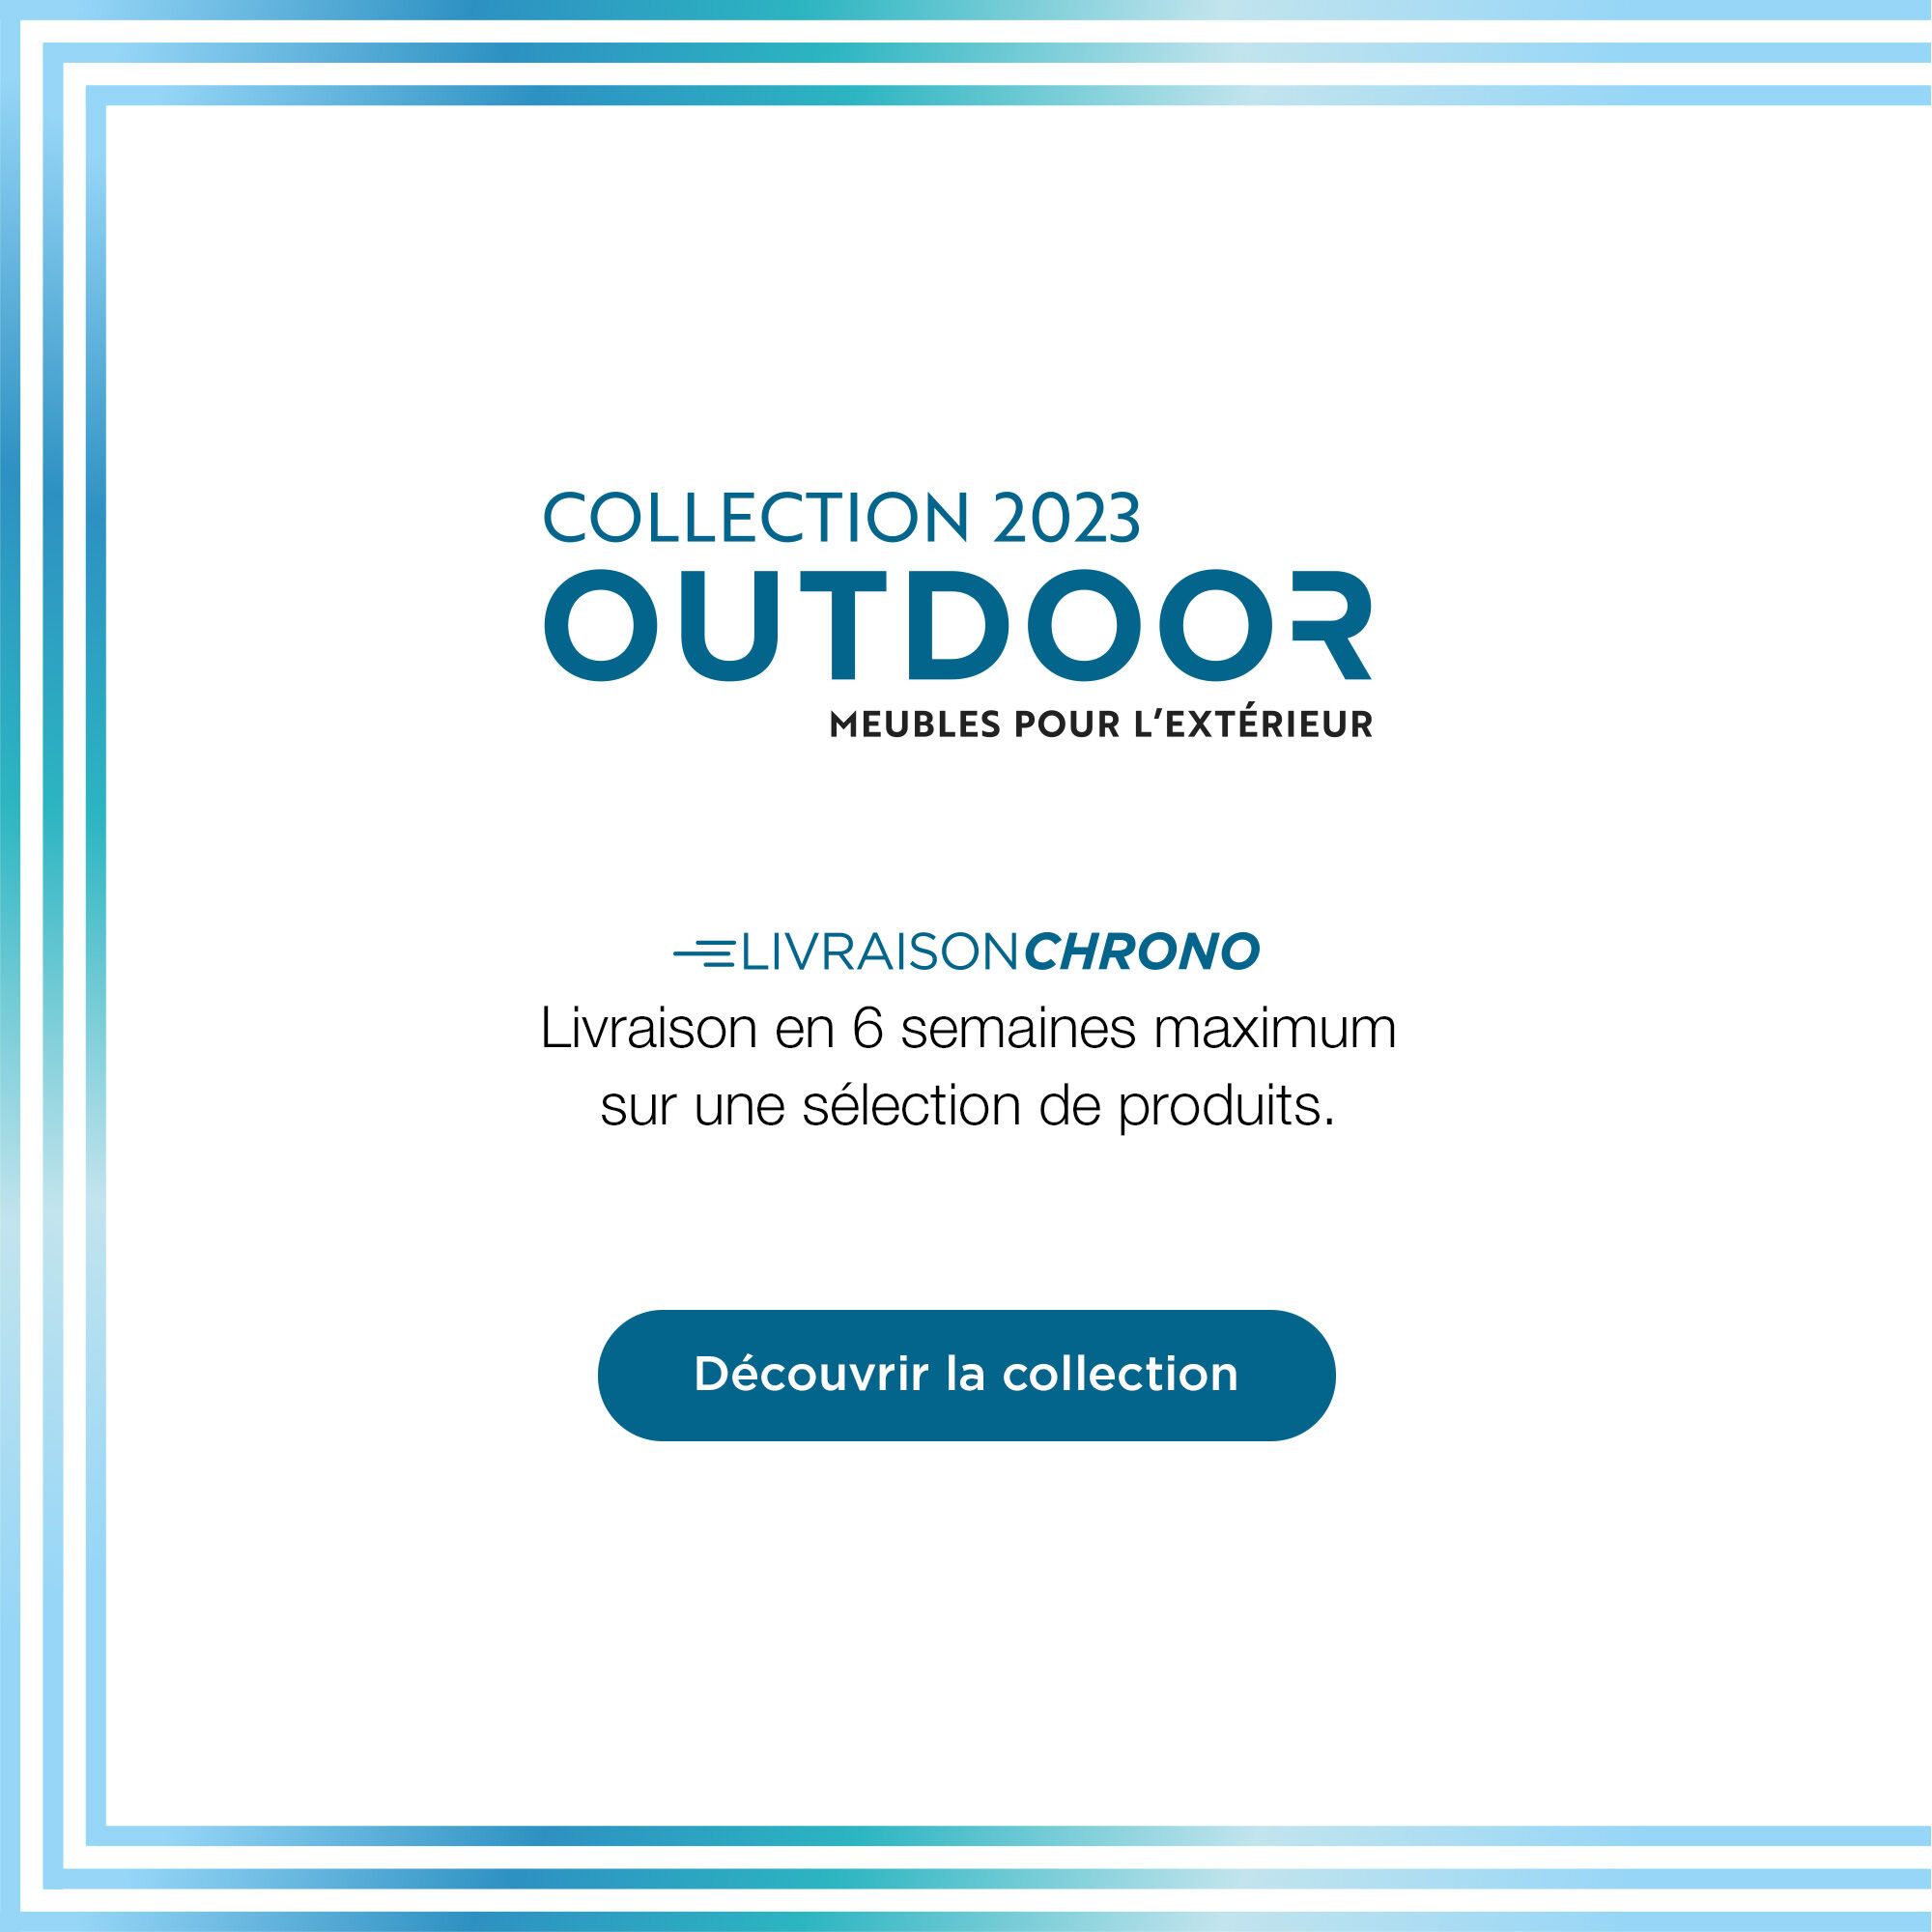 Outdoor Collection 2023